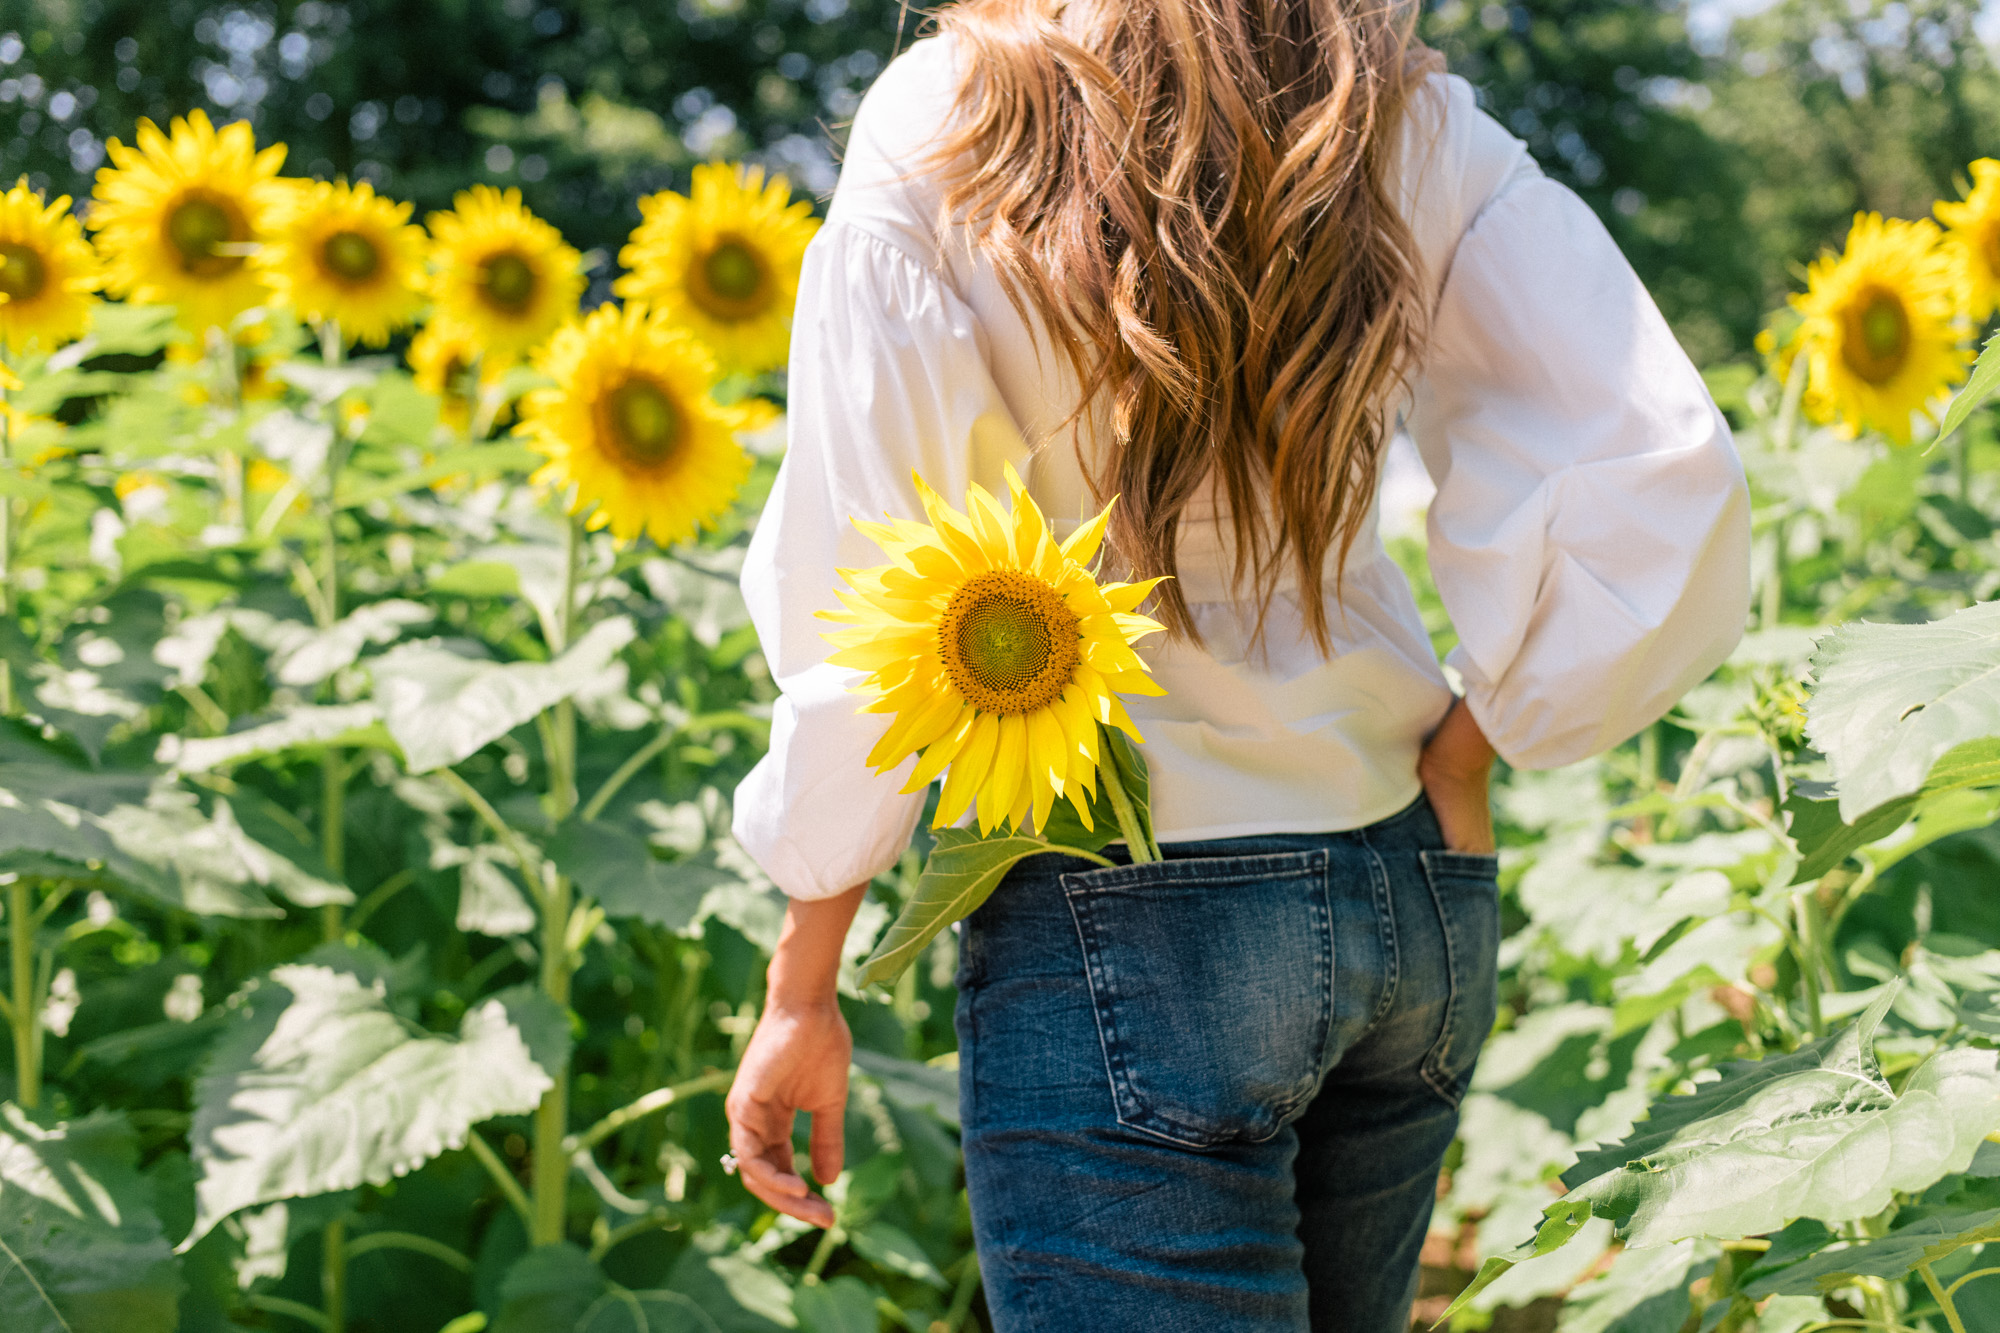 gal-meets-glam-sunflowers-asheville-1003660